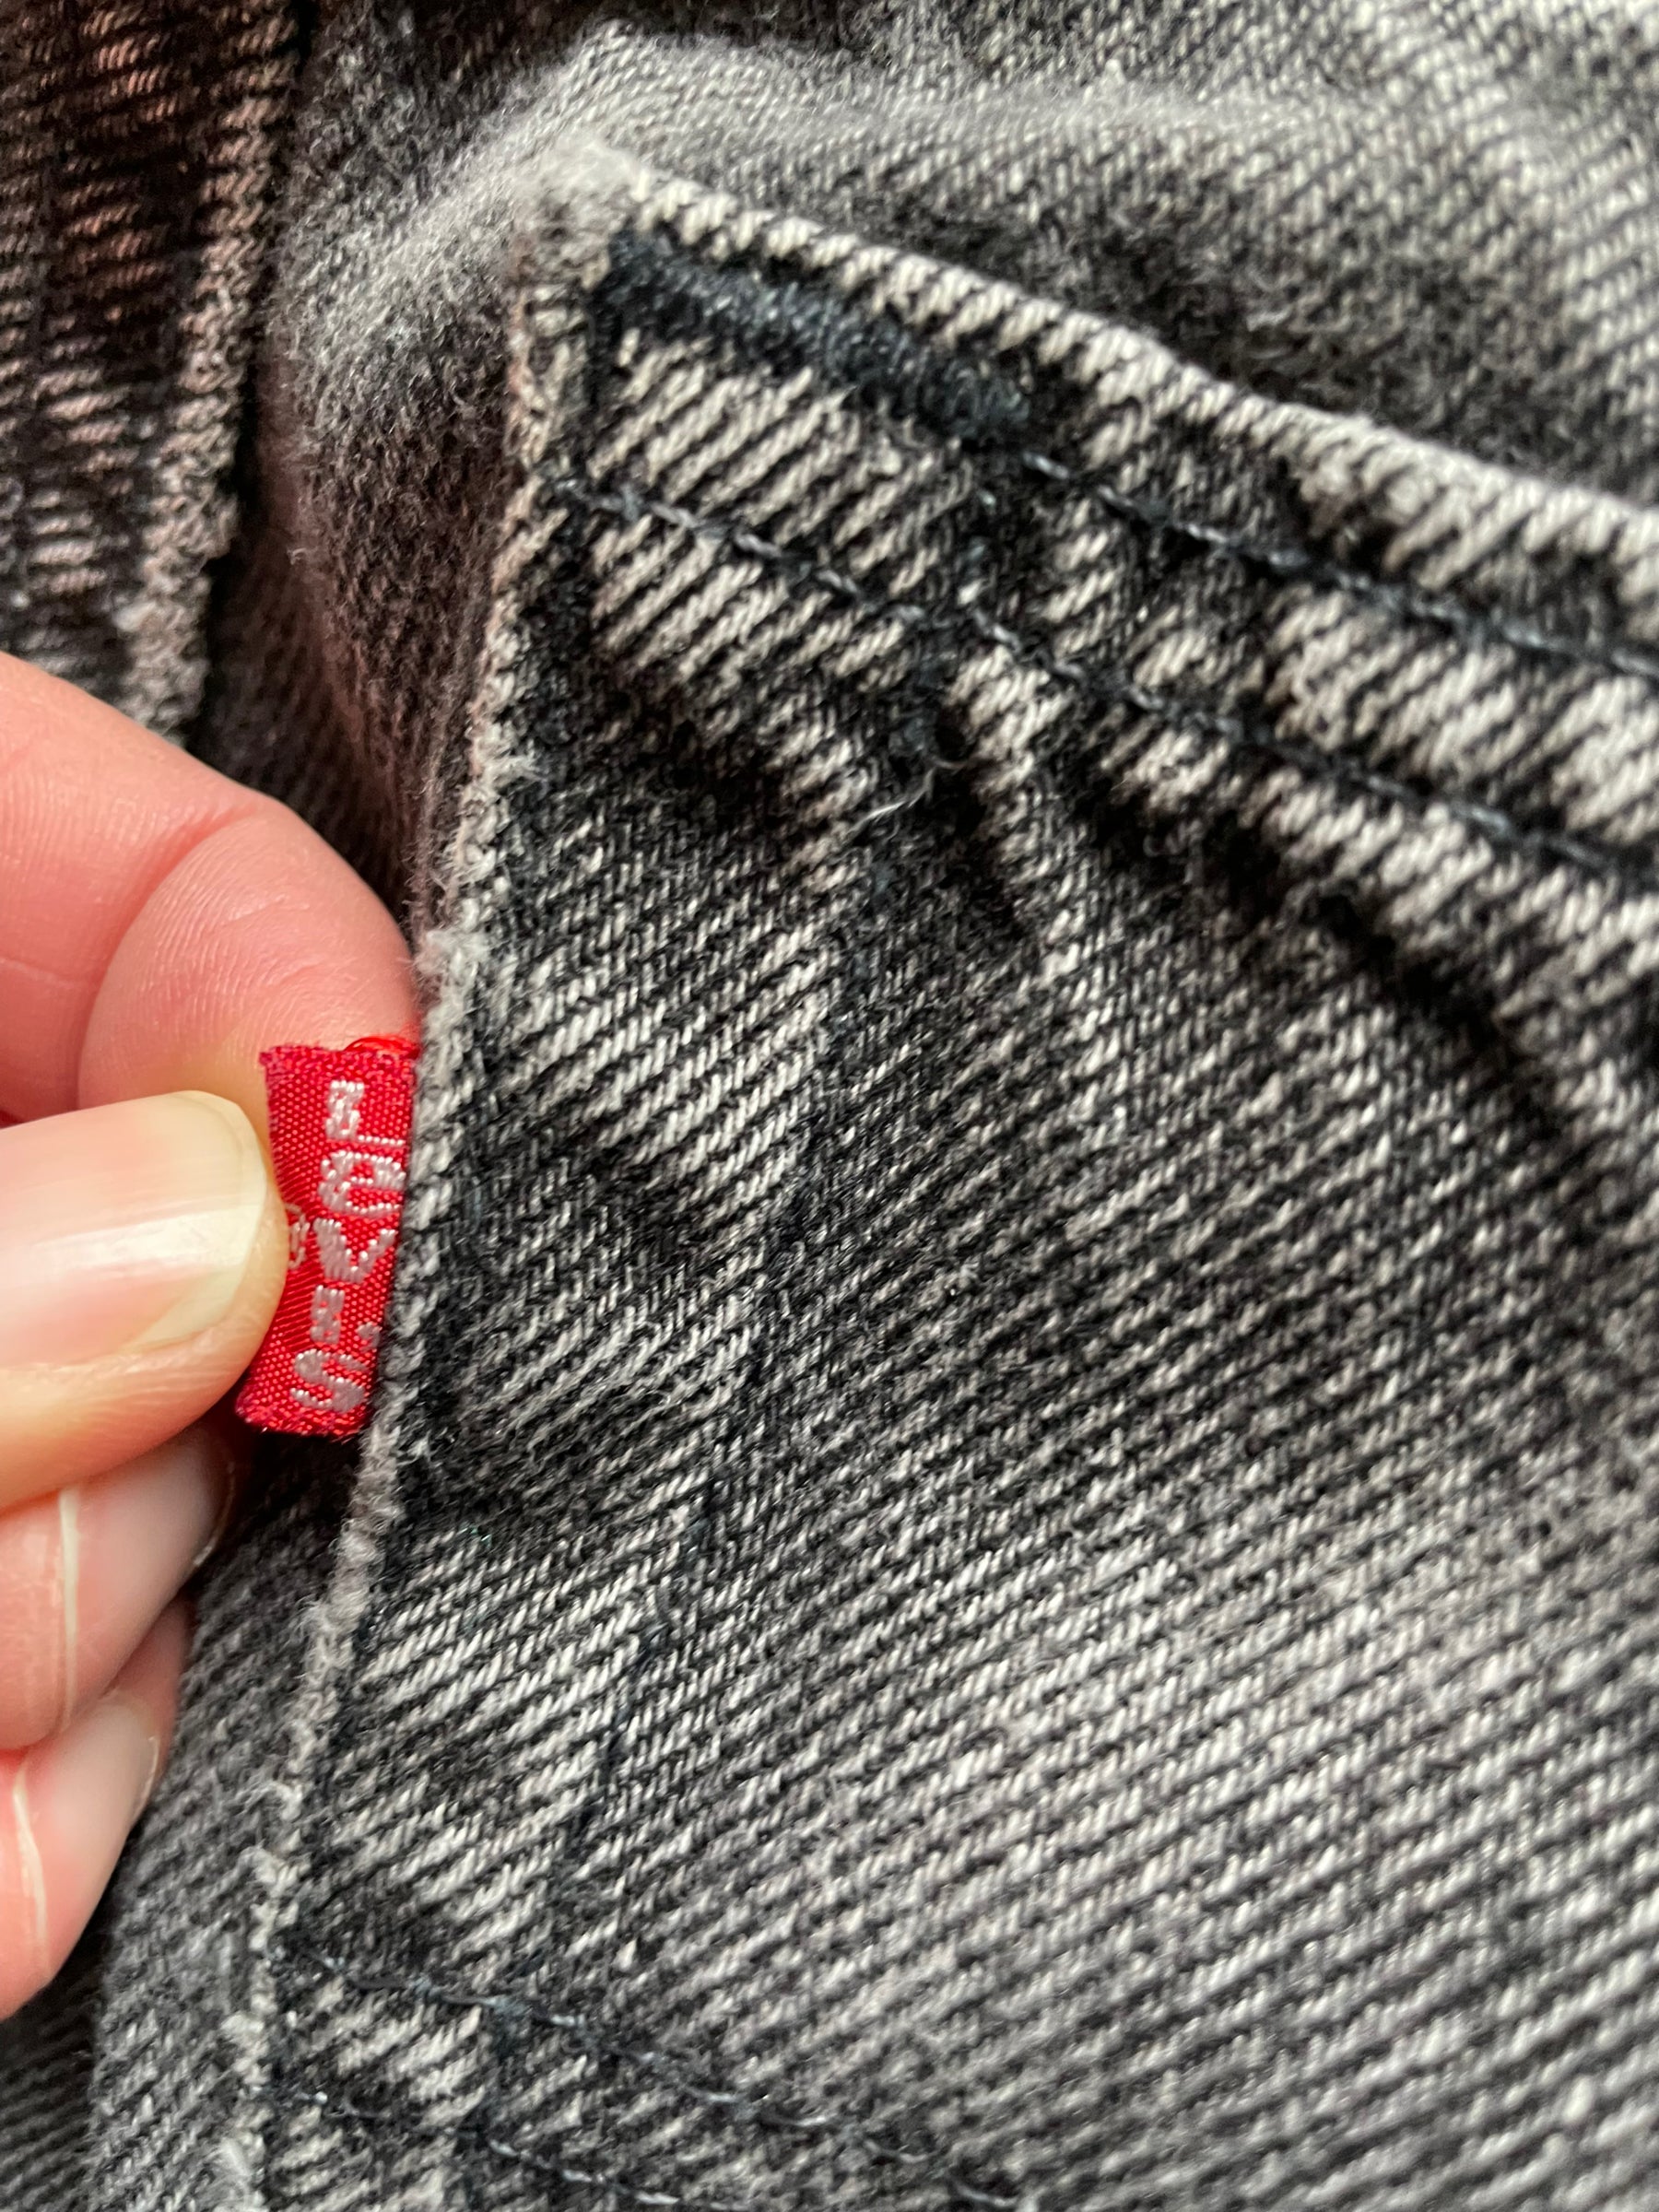 Red tag view of Vintage USA Mended Black Levi's 550s 33x34 